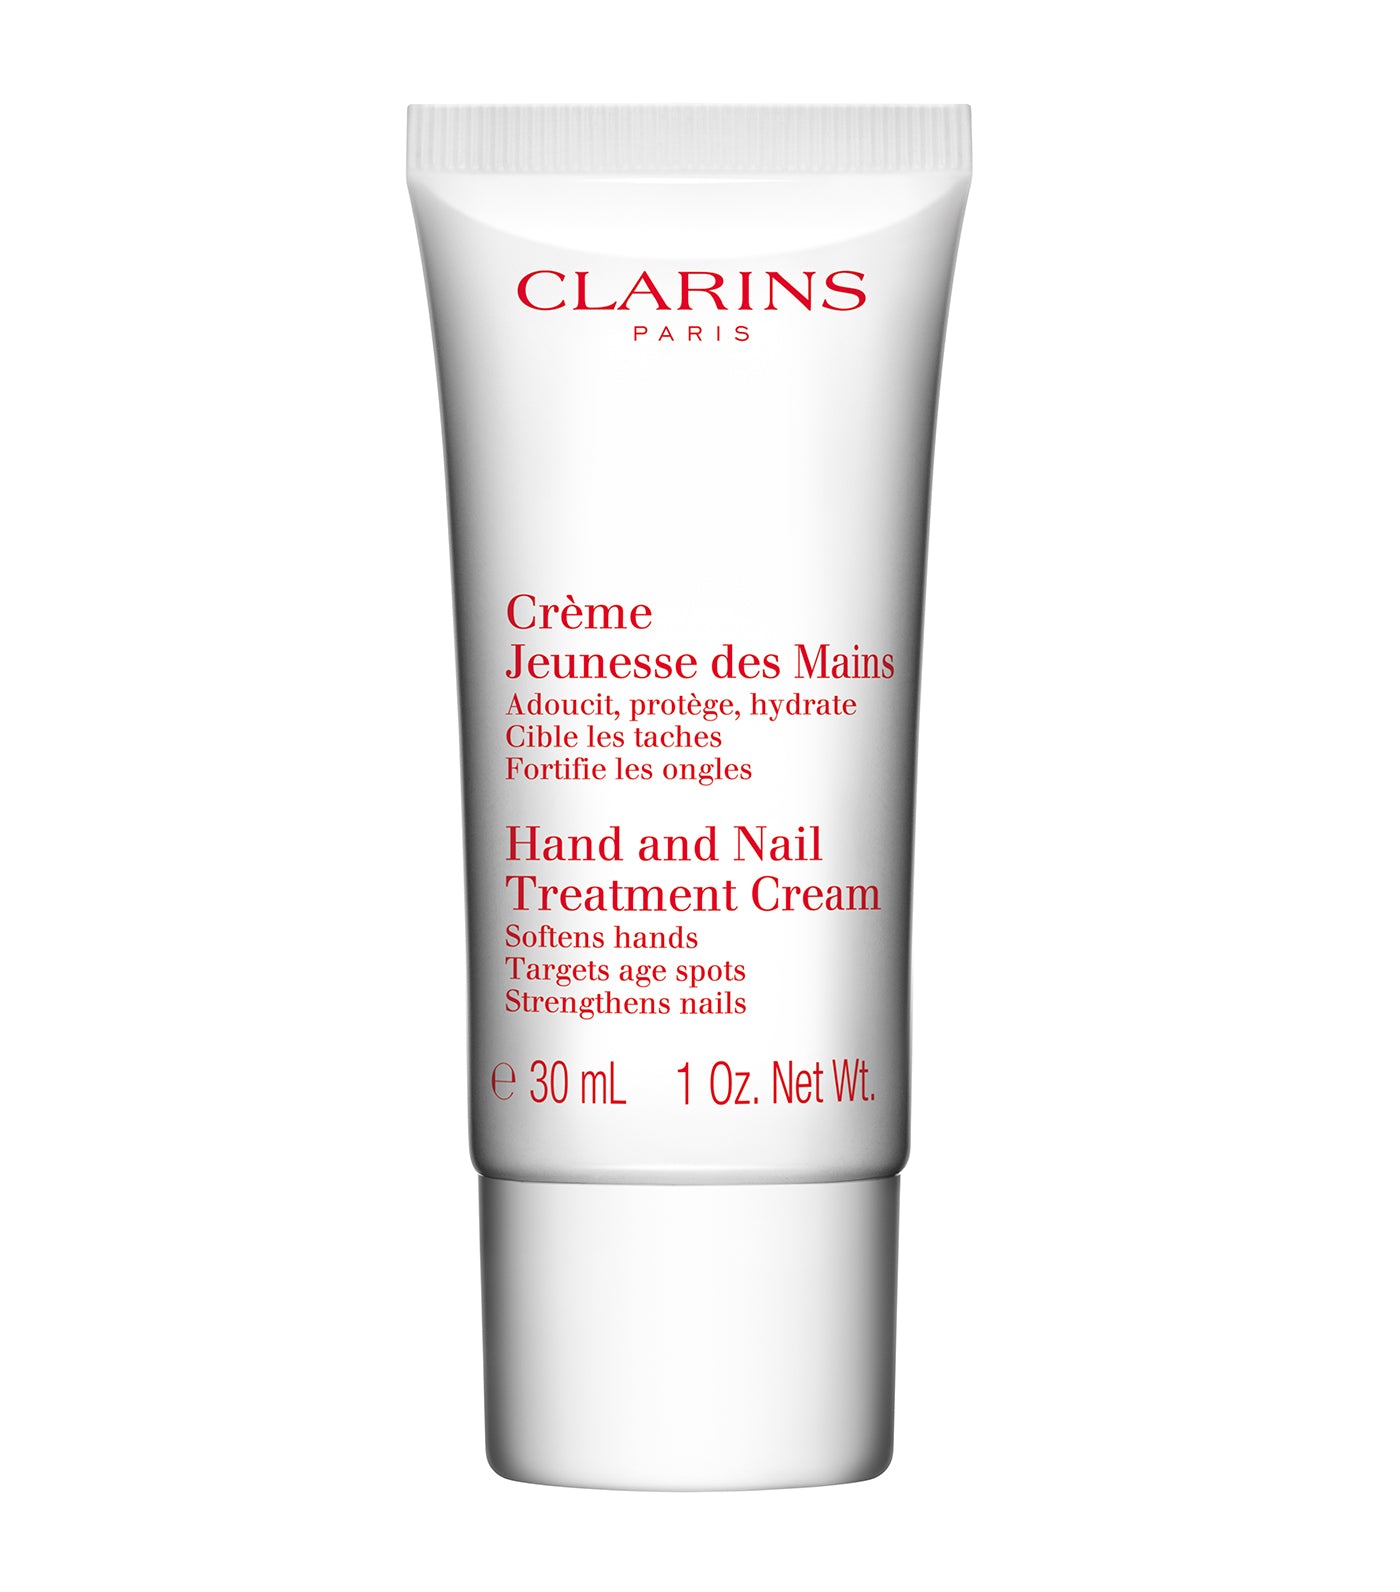 Clarins Free Deluxe-sized Hand and Nail Treatment Cream